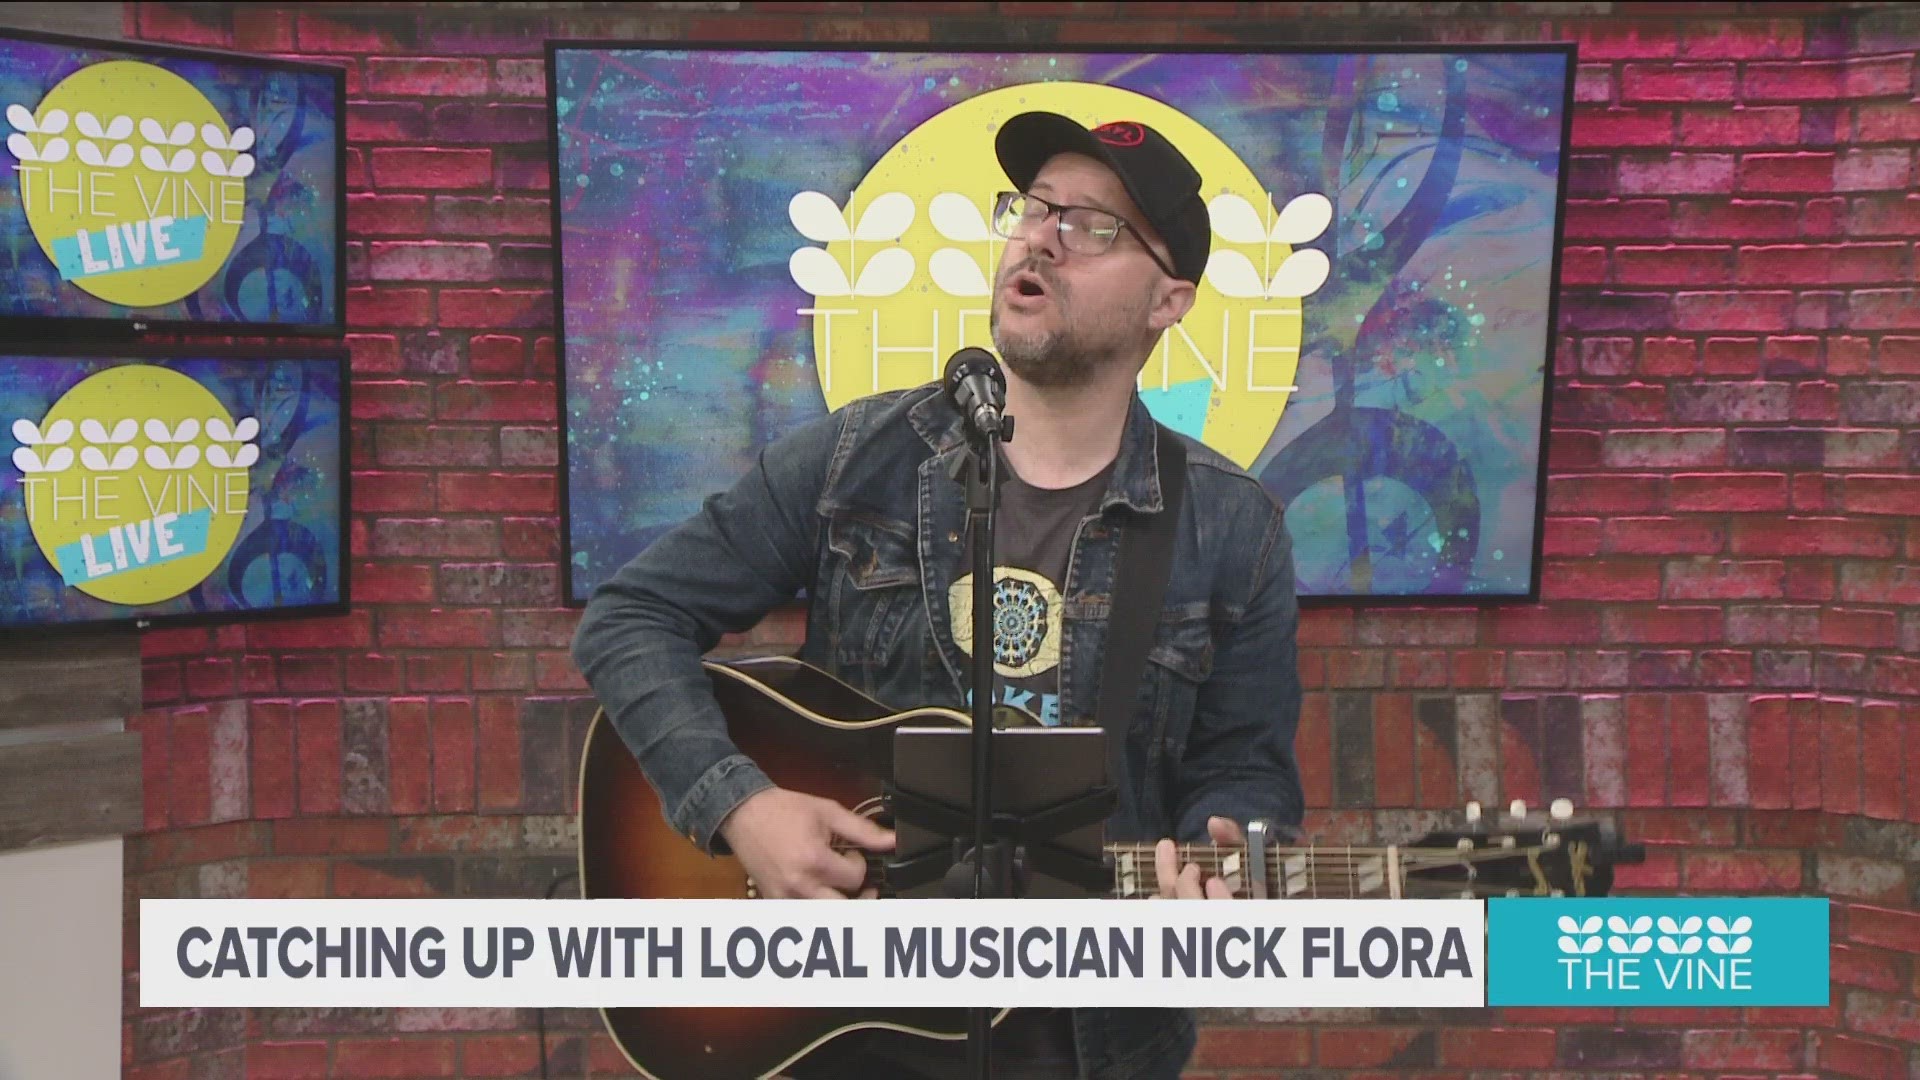 Nick Flora is back on The Vine! He tells us more about his journey as a musician.